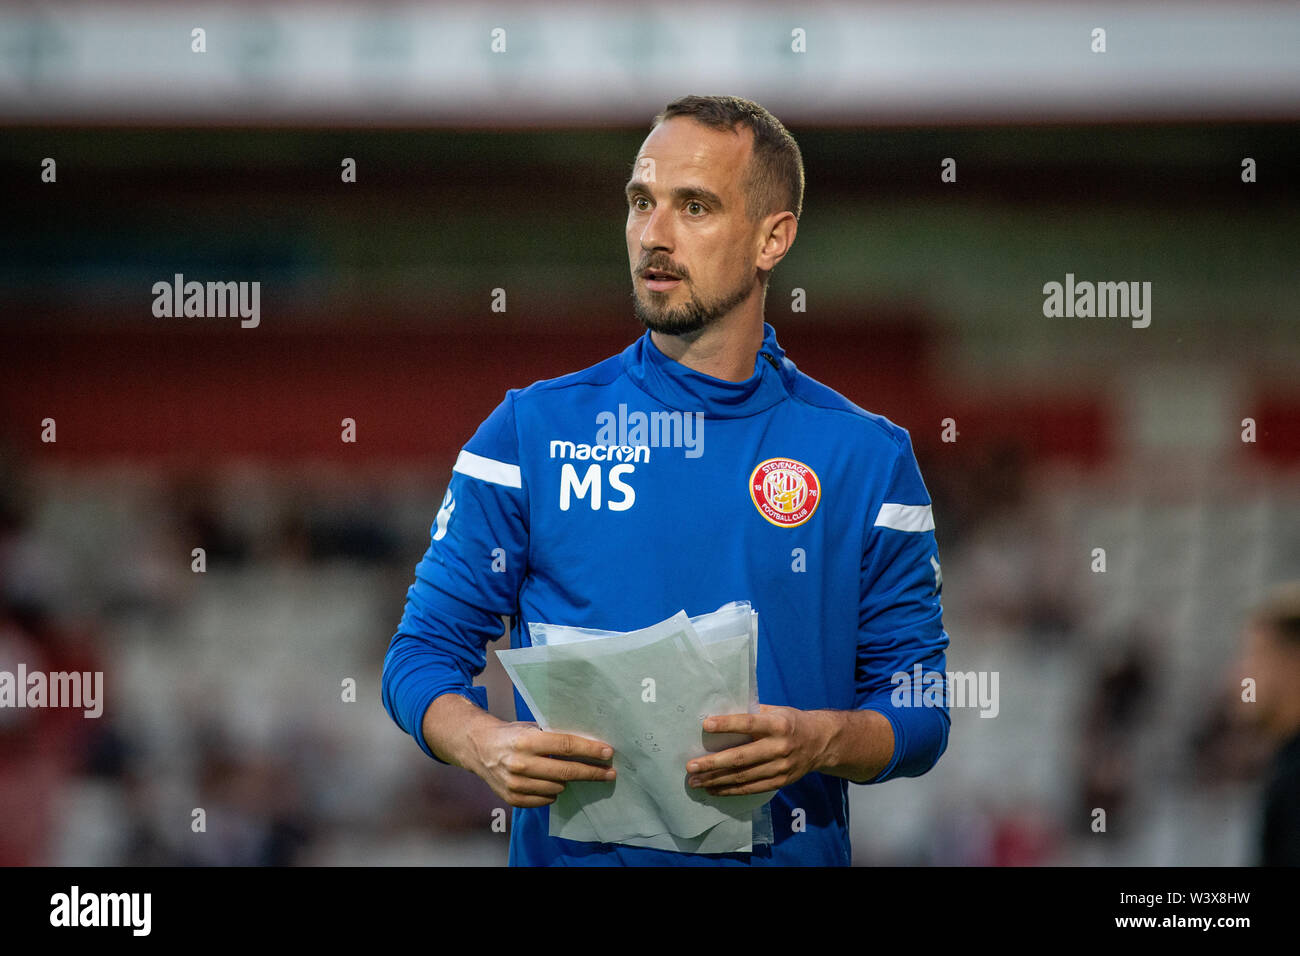 Welsh football coach Mark Sampson on the touchline during football match Stock Photo